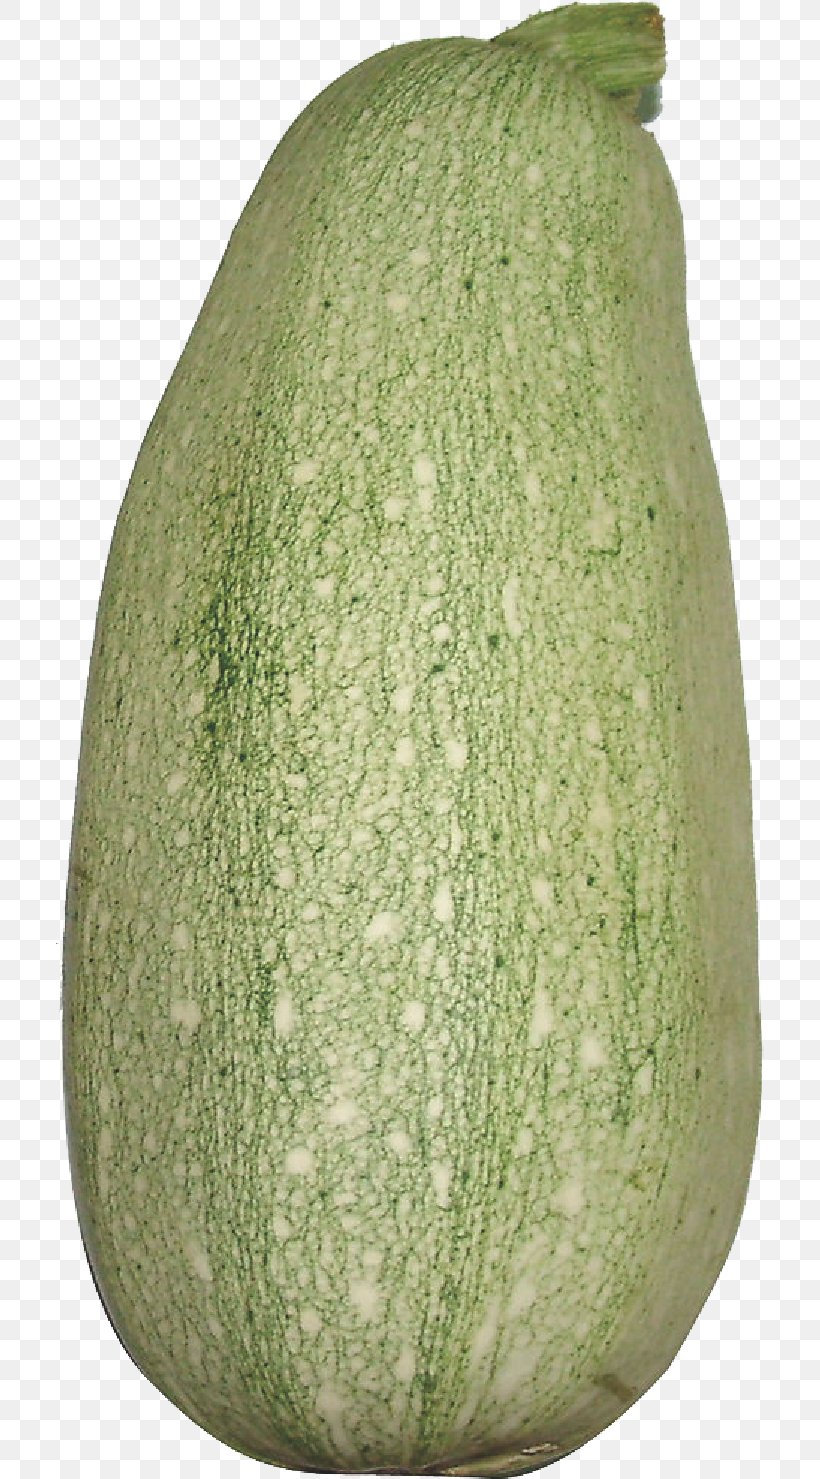 Wax Gourd Cantaloupe Melon Pumpkin, PNG, 709x1479px, Wax Gourd, Artifact, Bitter Melon, Cantaloupe, Cucumber Gourd And Melon Family Download Free